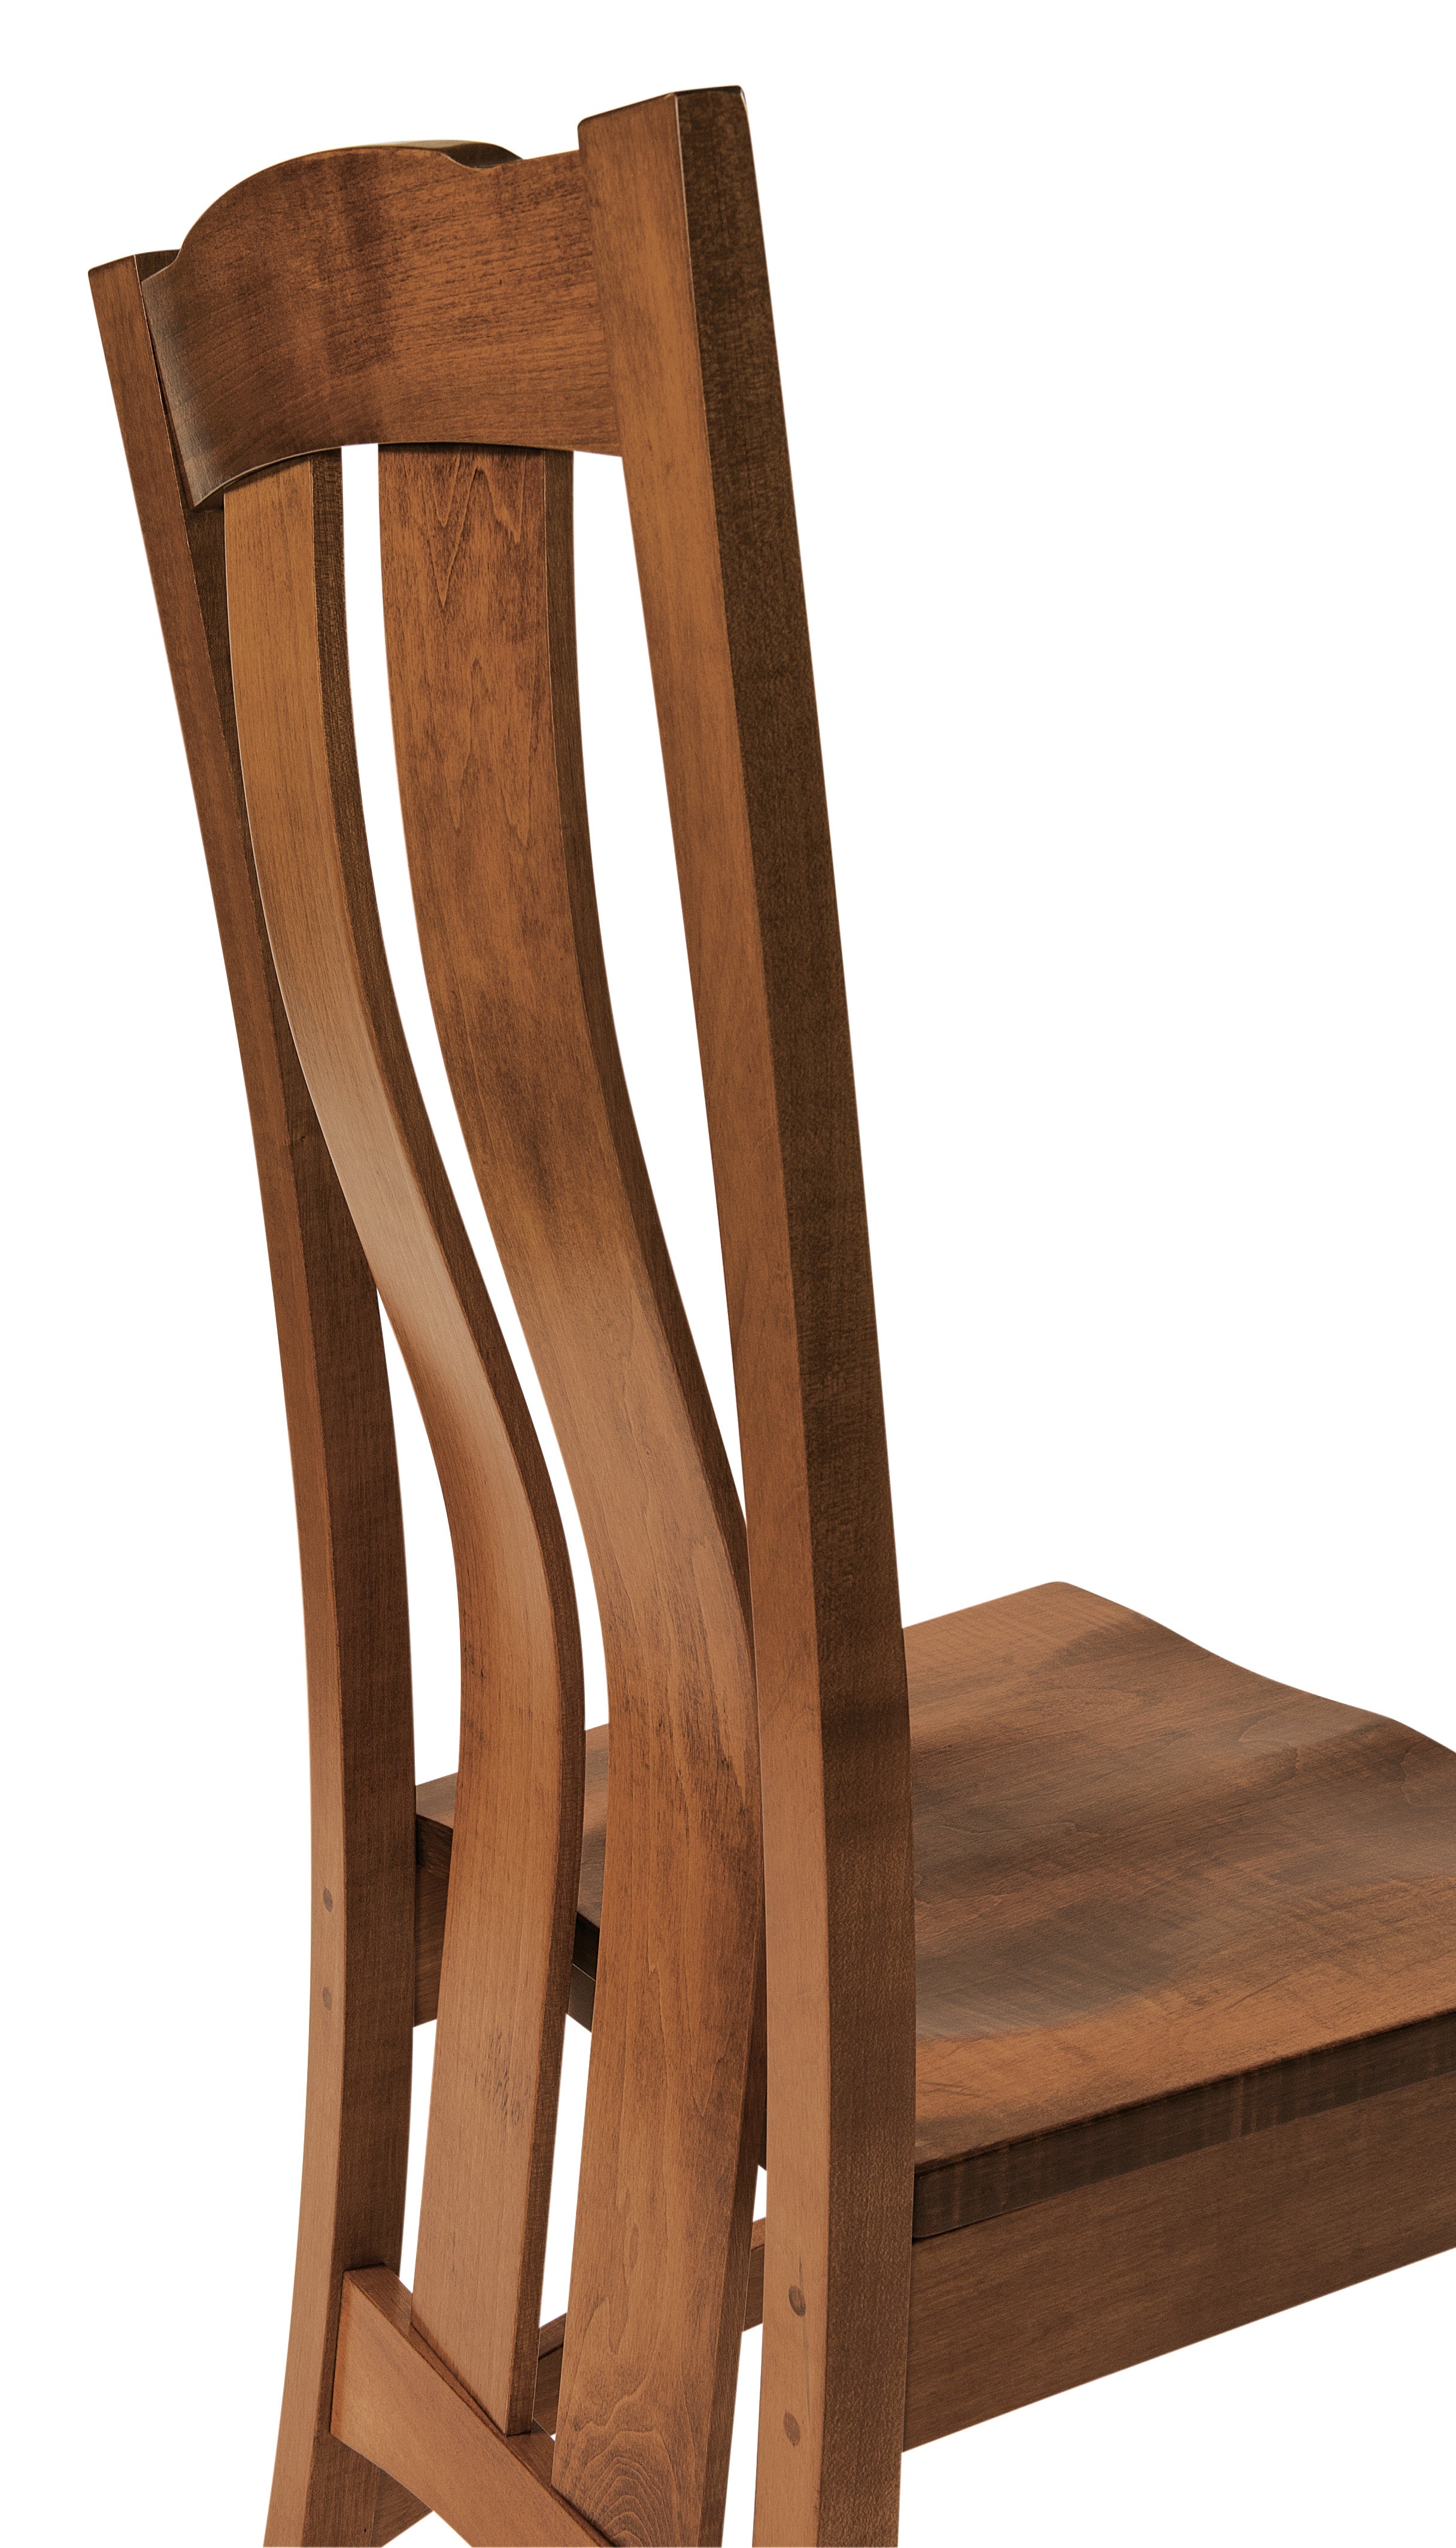 Amish Kensington Mission Dining Chair